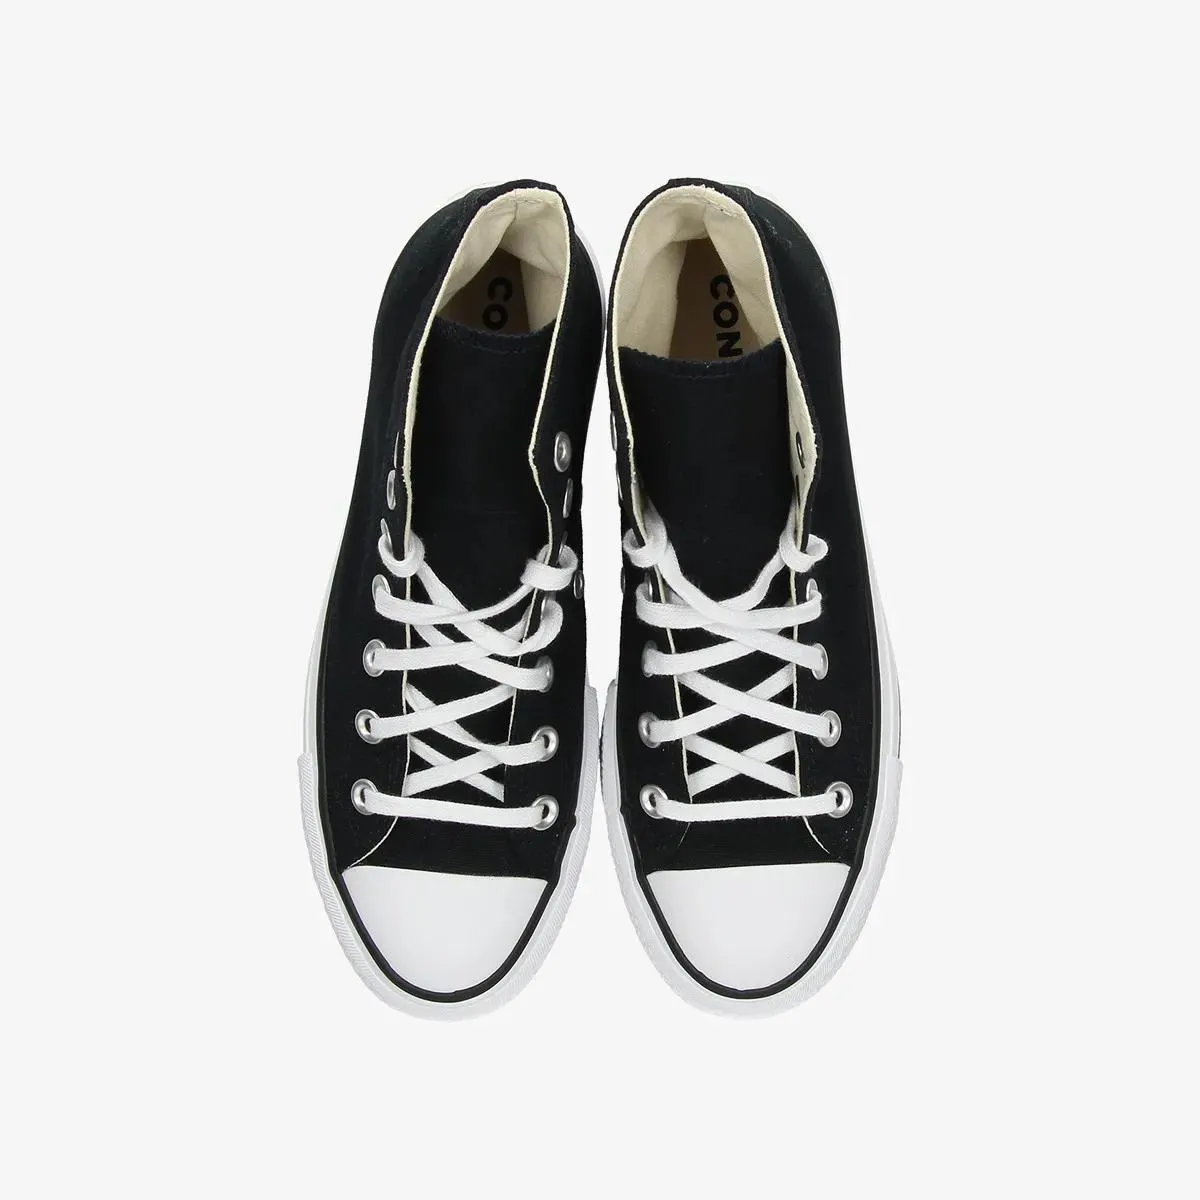 Converse Tenisice CHUCK TAYLOR ALL STAR LIFT 